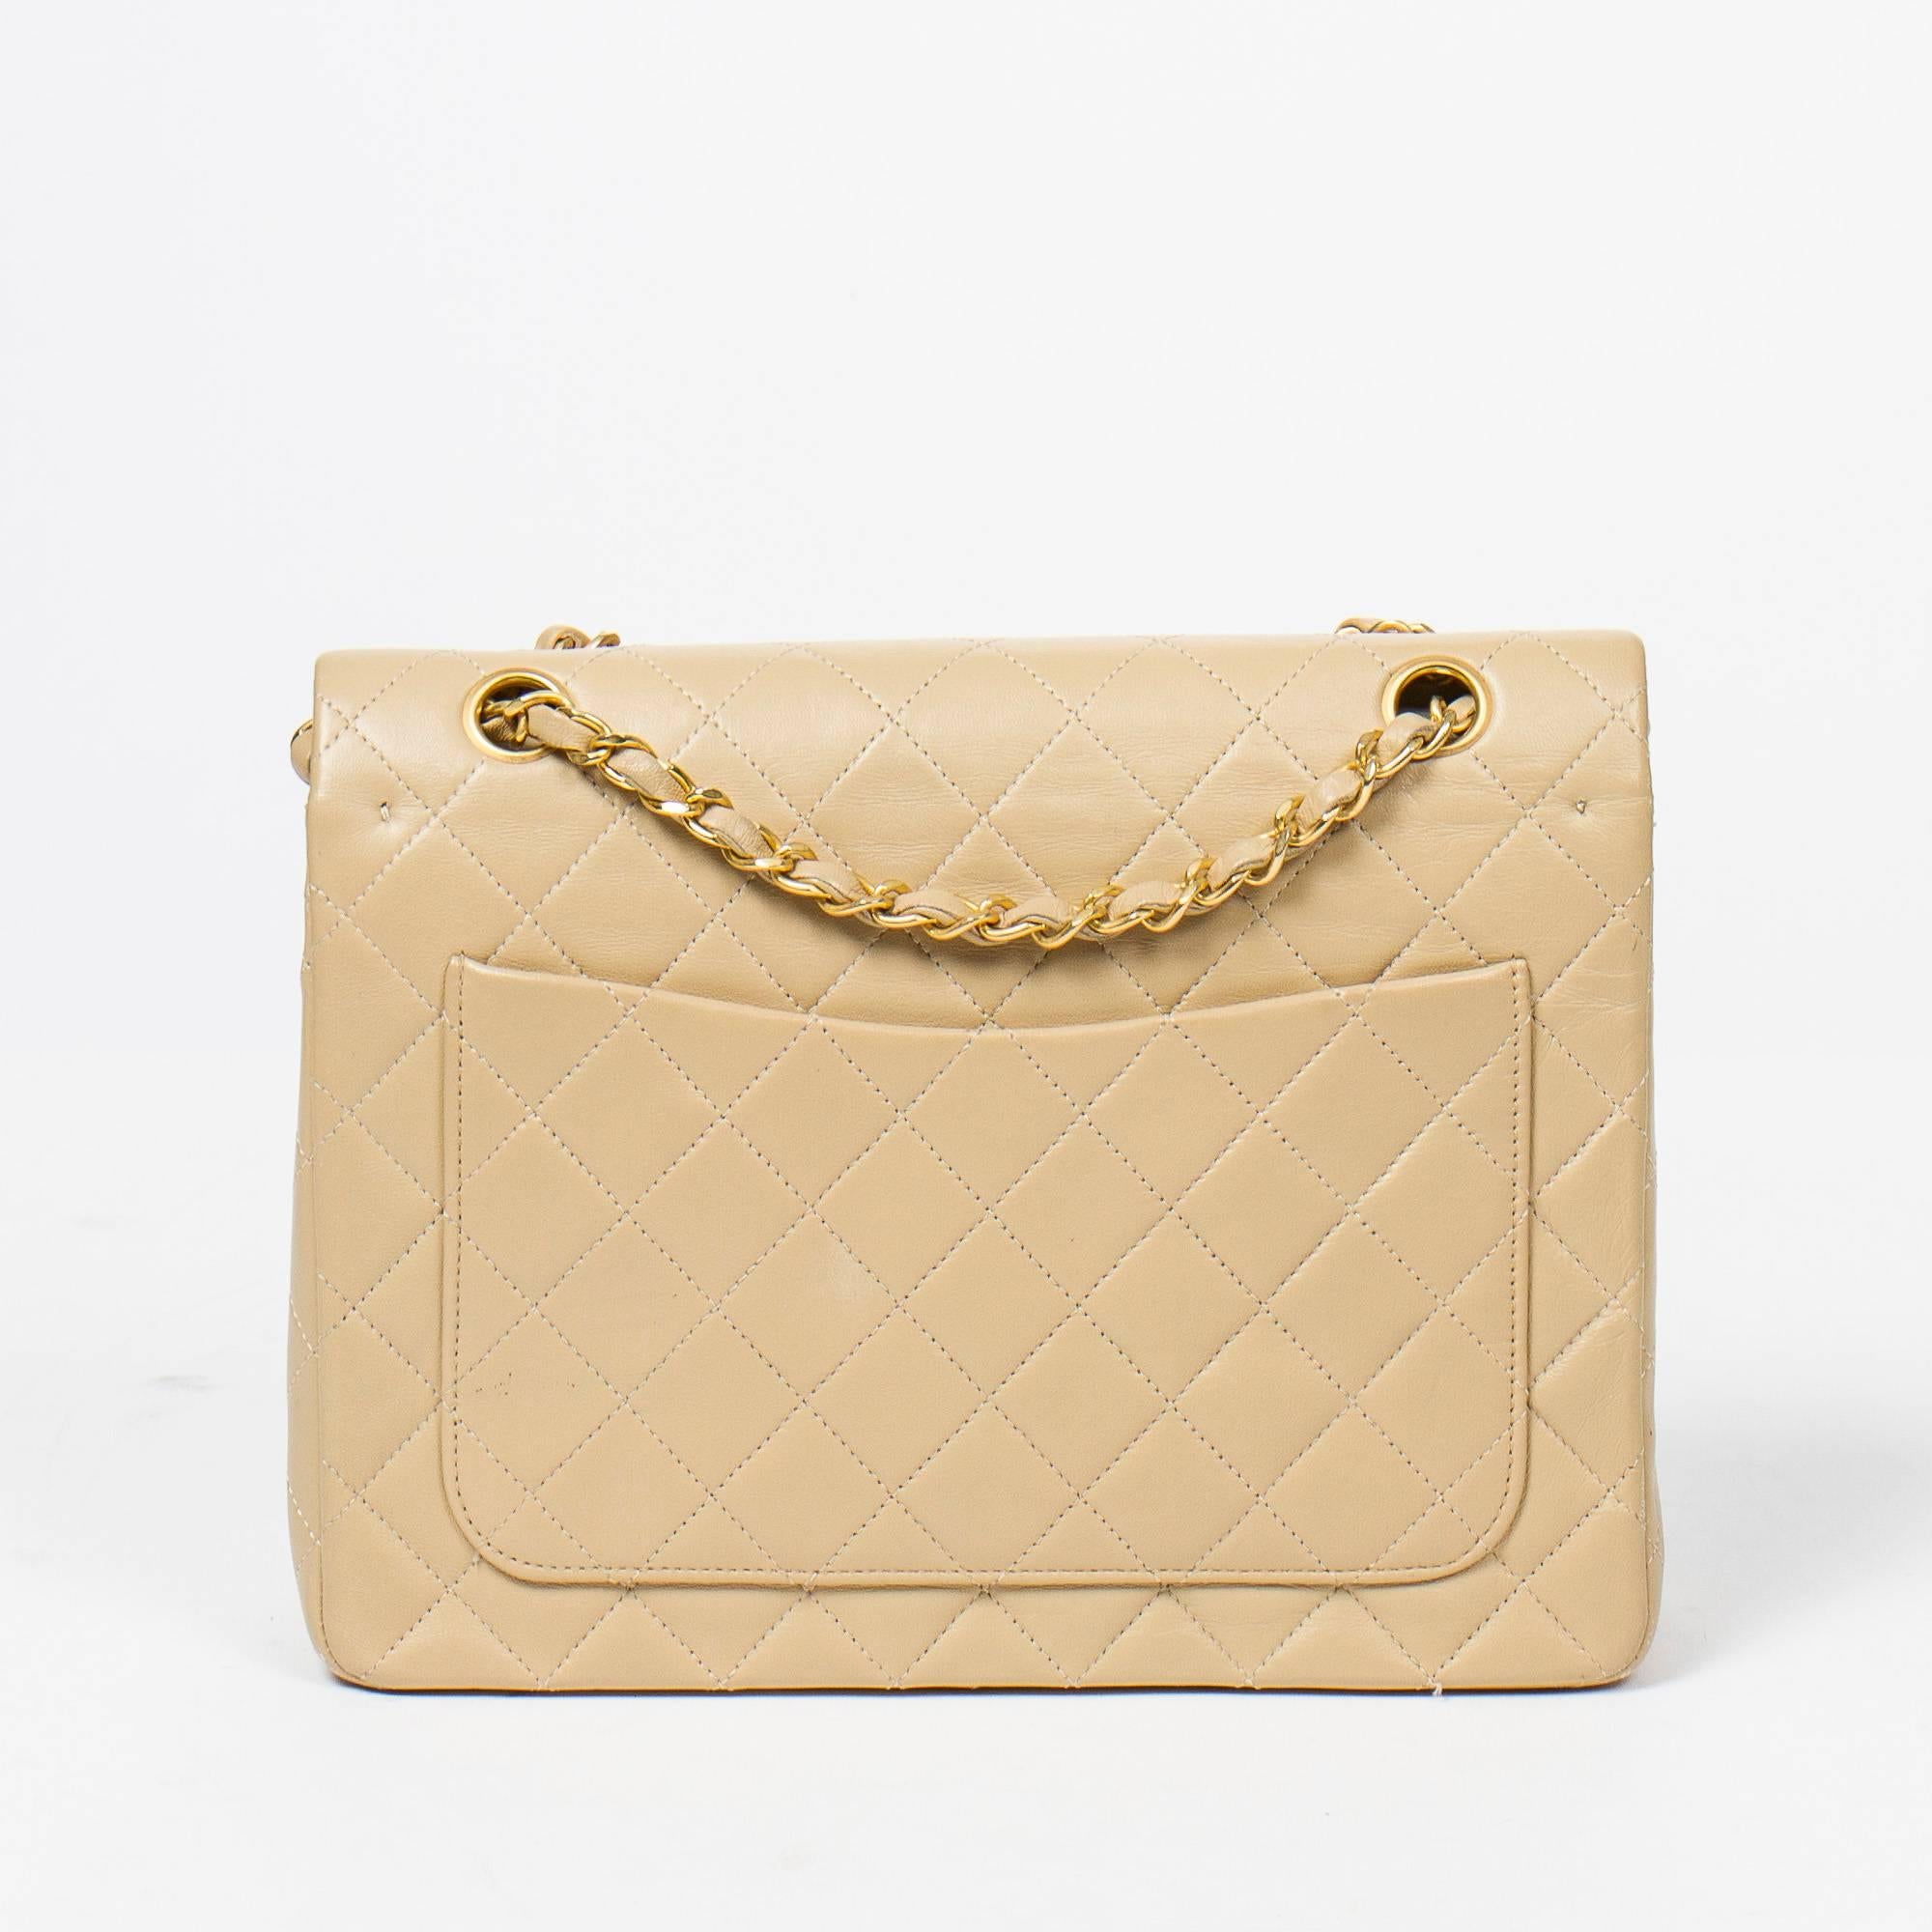 Chanel Tall Double Flap Beige Leather  1